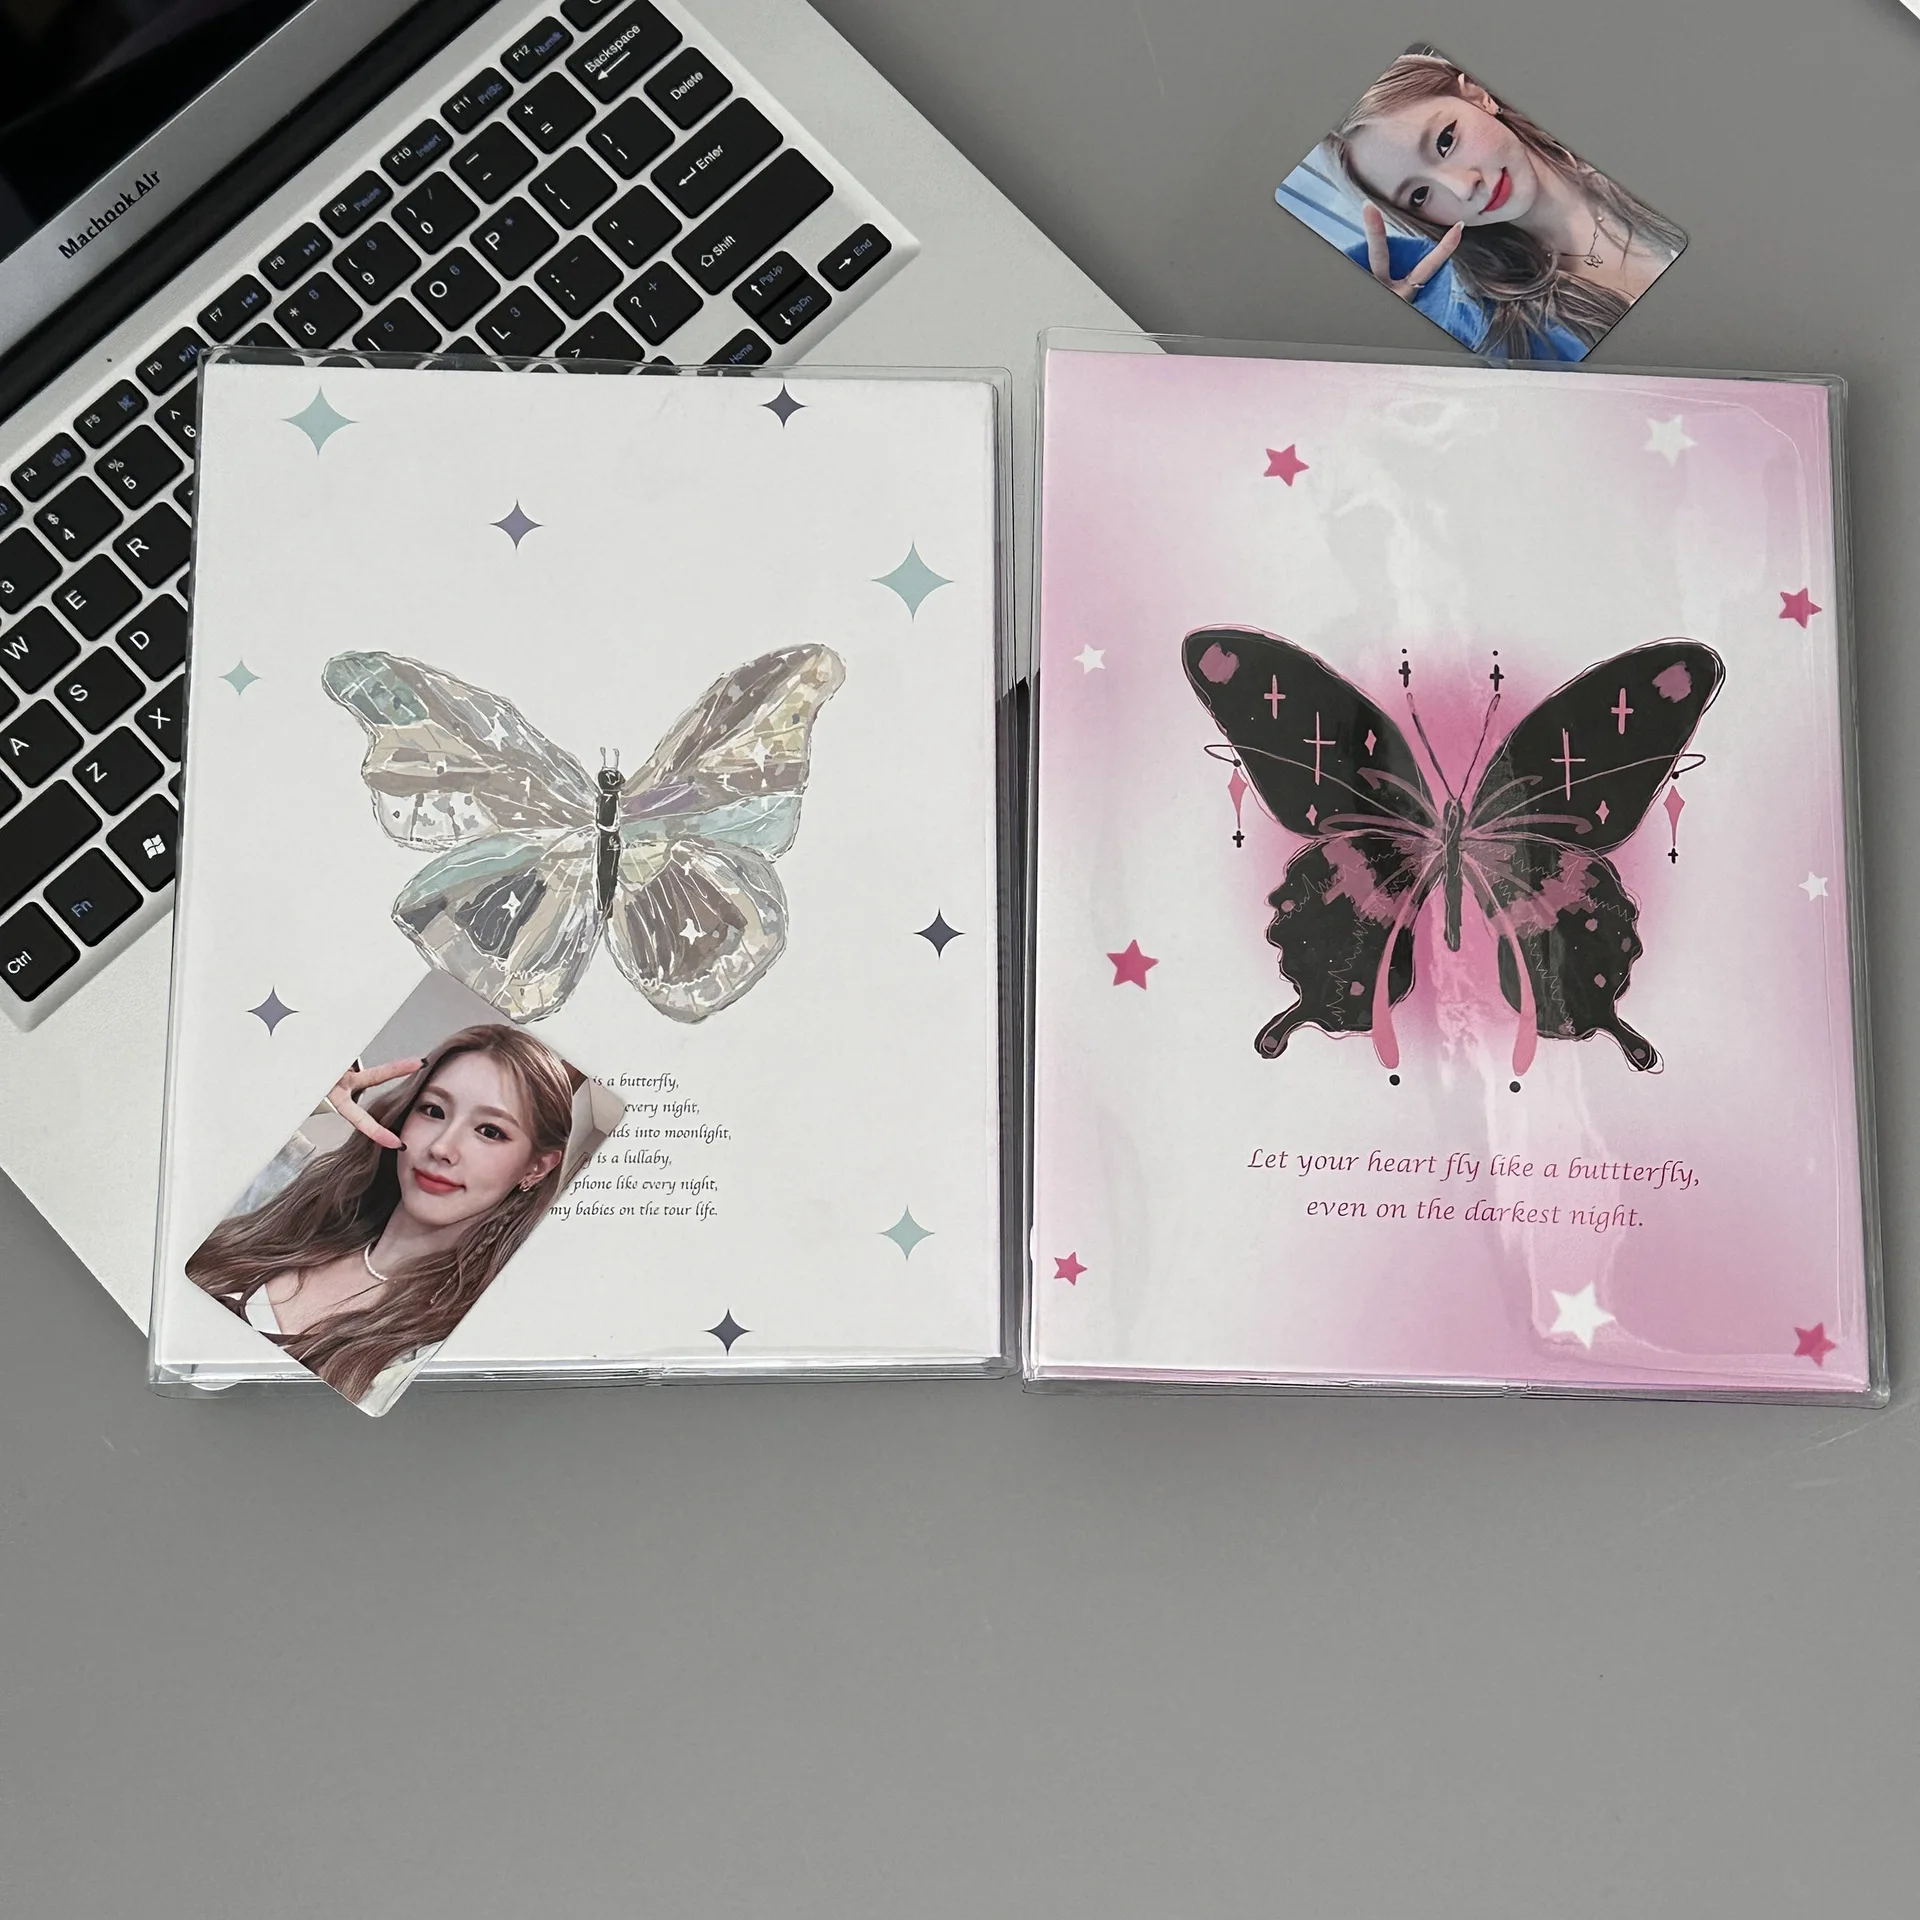 

IFFVGX Butterfly A5 Kpop Photocard Binder Collect Book Idol Photo Cards Storage Album Hardcover Notebook Kawaii Korea Stationery